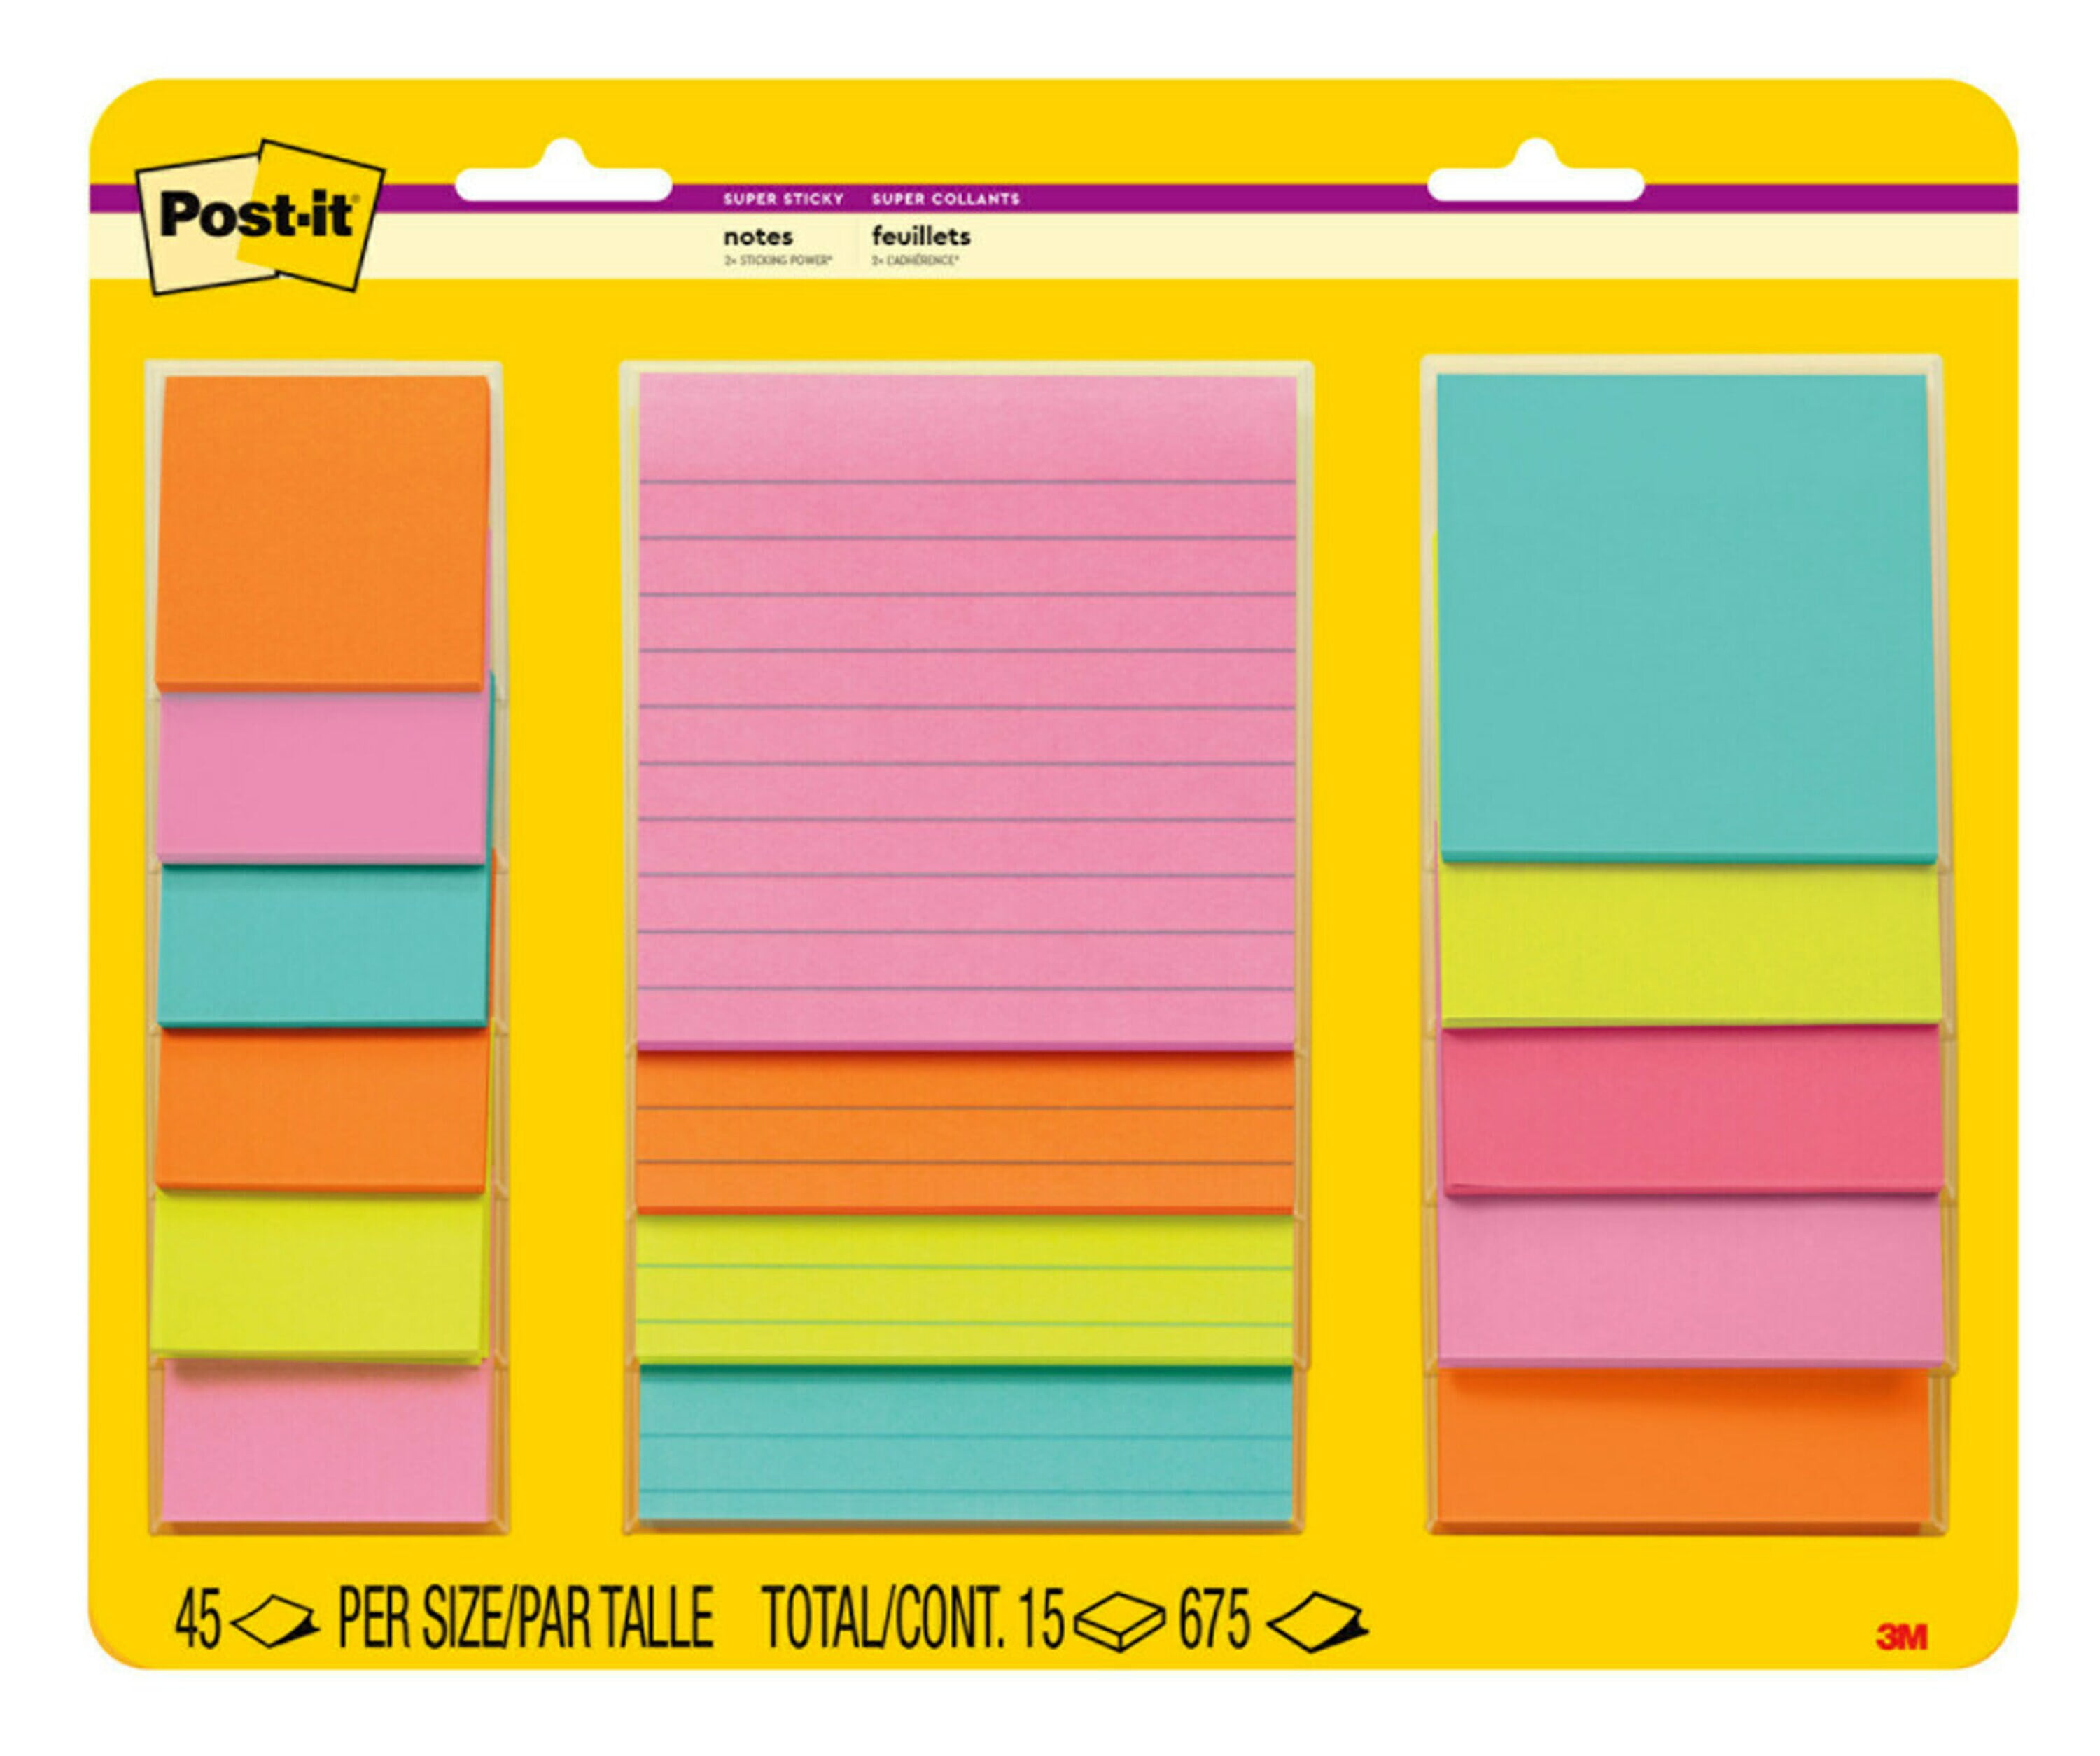 3M 2 in 1 Pens Highlighter Yellow Post-it Sticky Note Memo Pad Flag Gift Colors